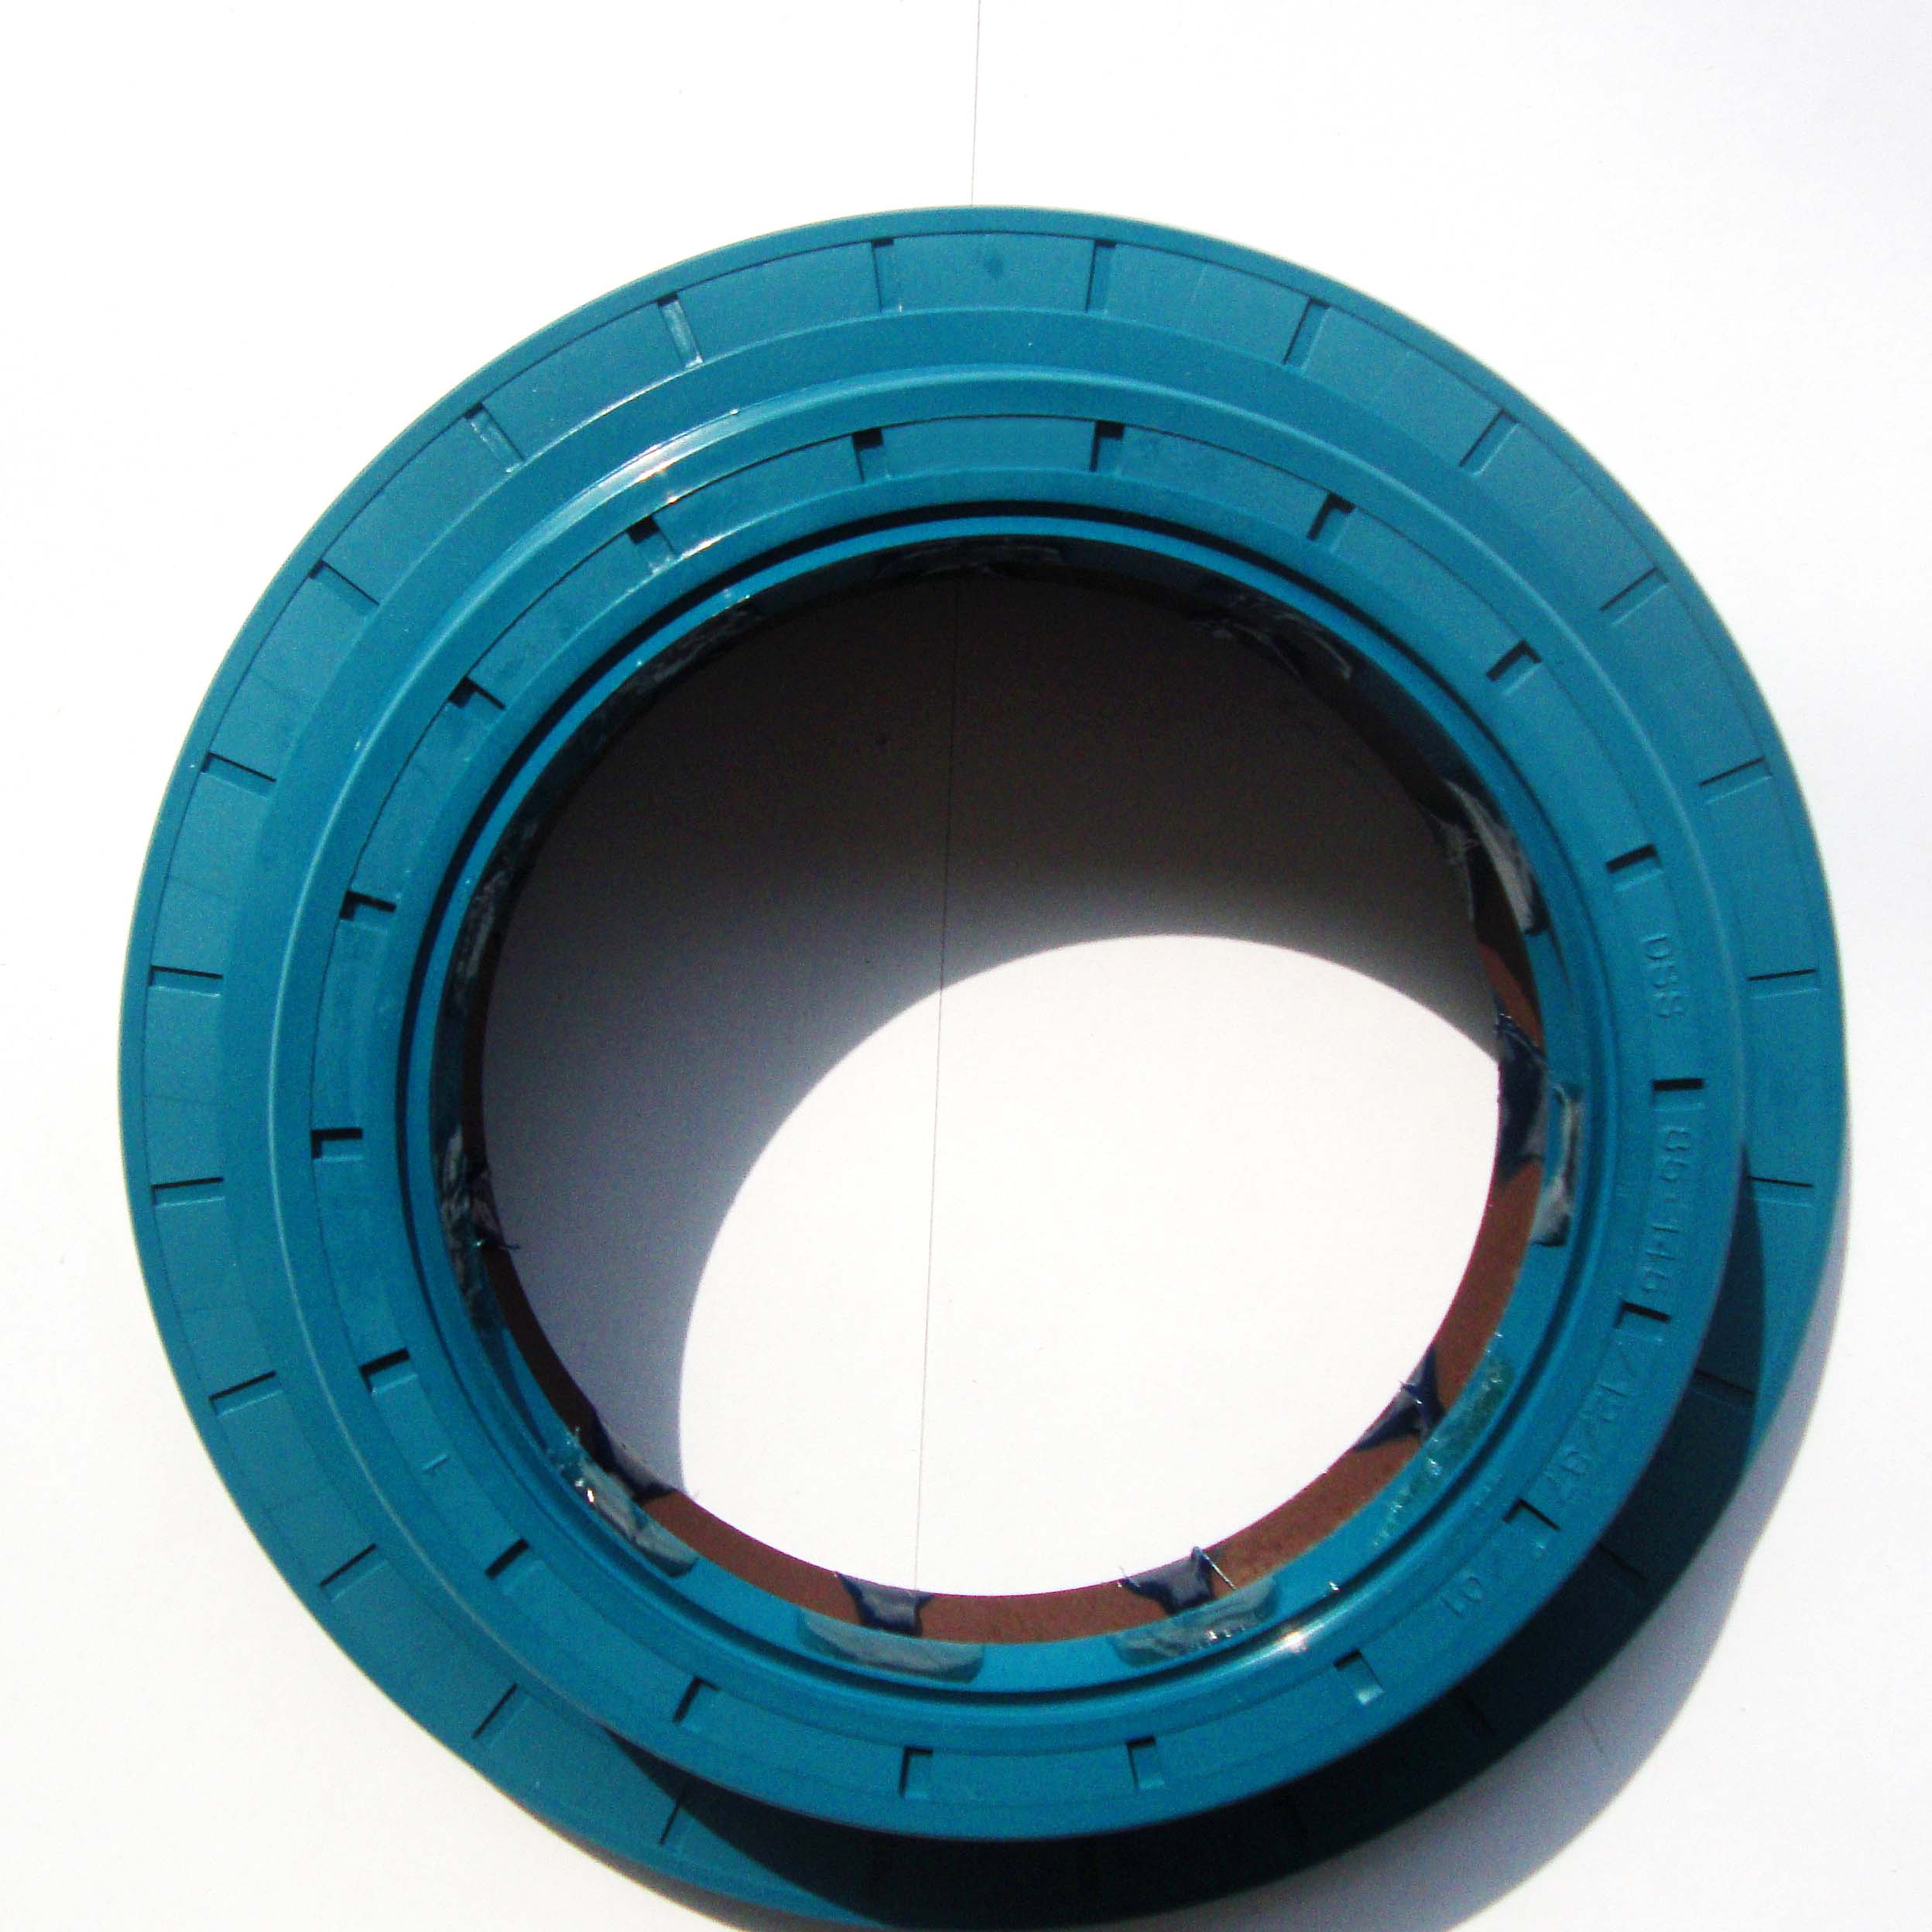 Oil Seal for Benz 85/145*12*37*01